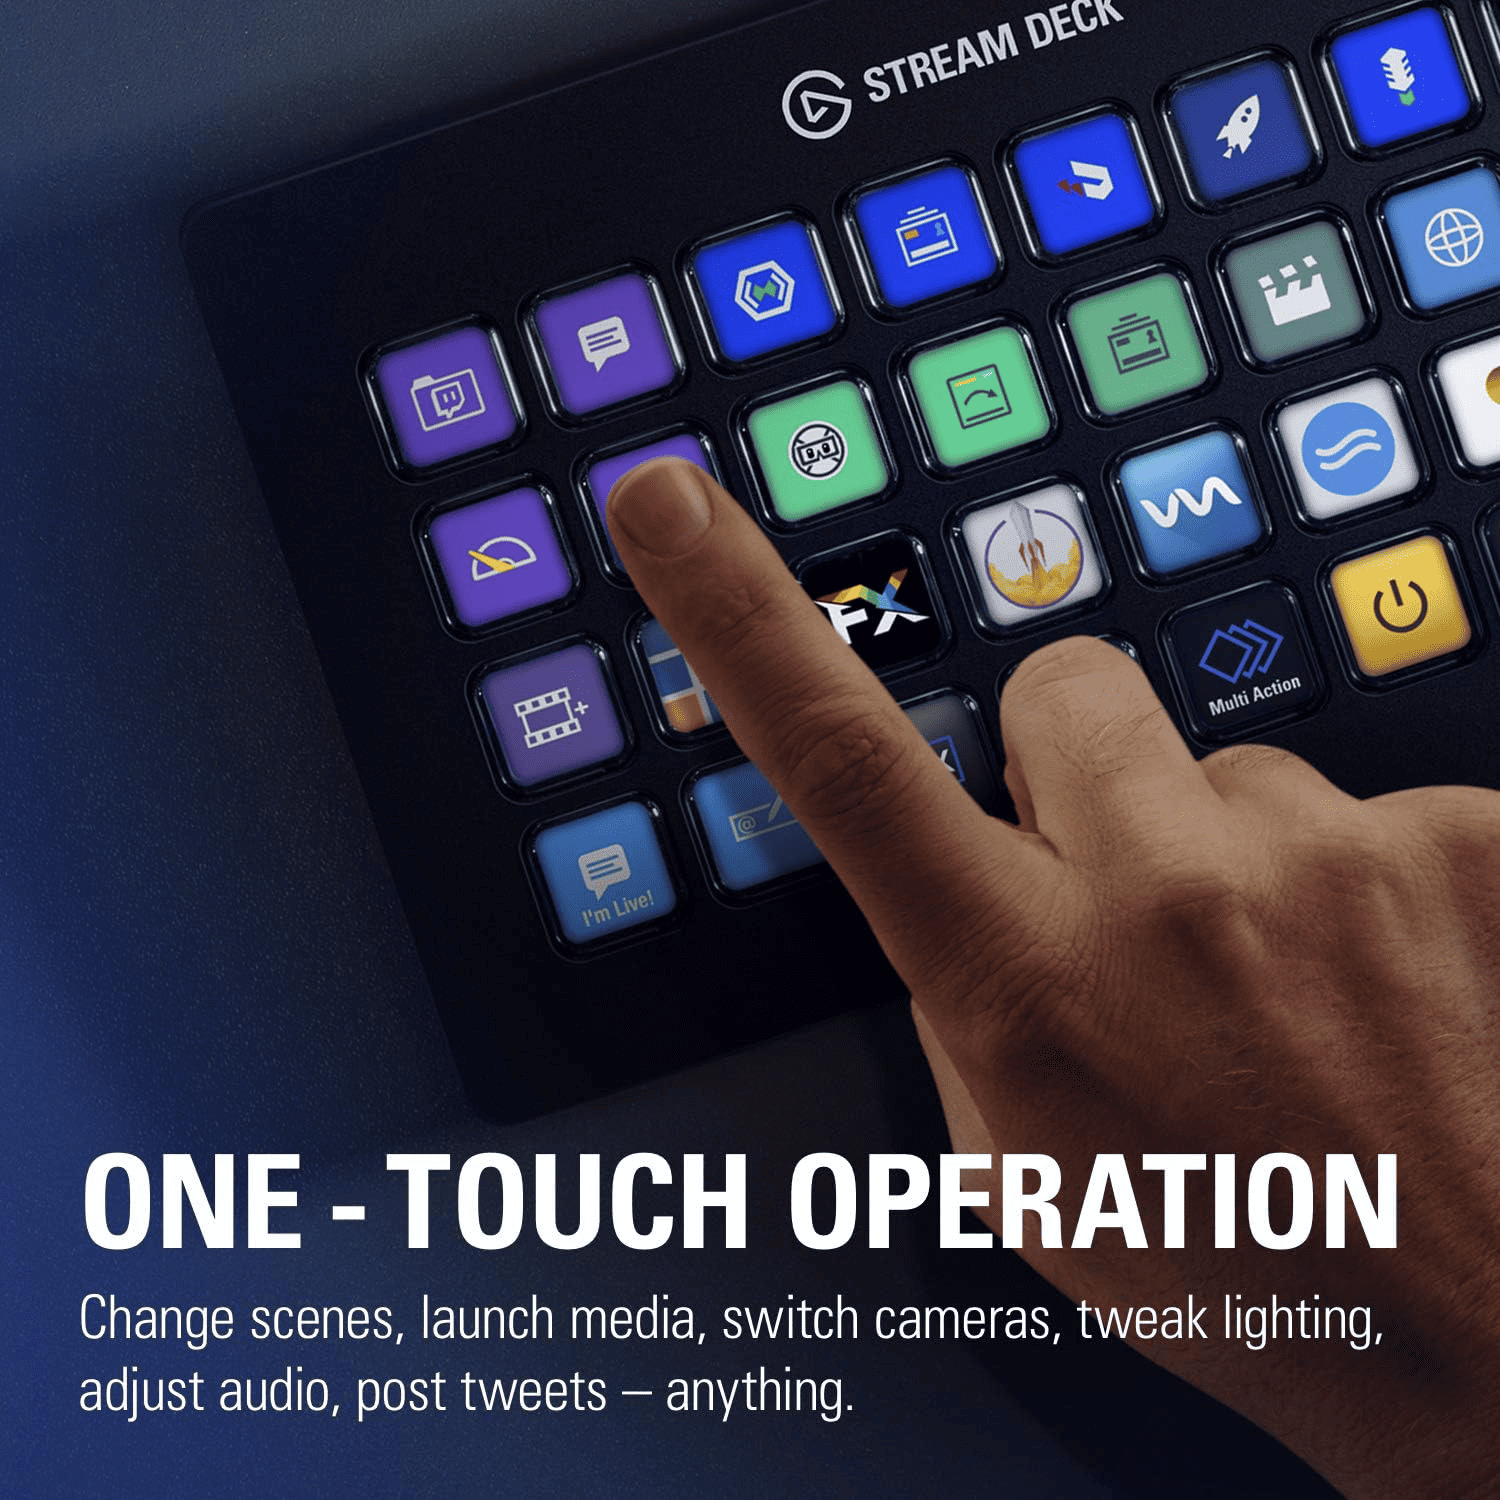 The Elgato Stream Deck allows Admins to access any app, website or other shortcut with one button.